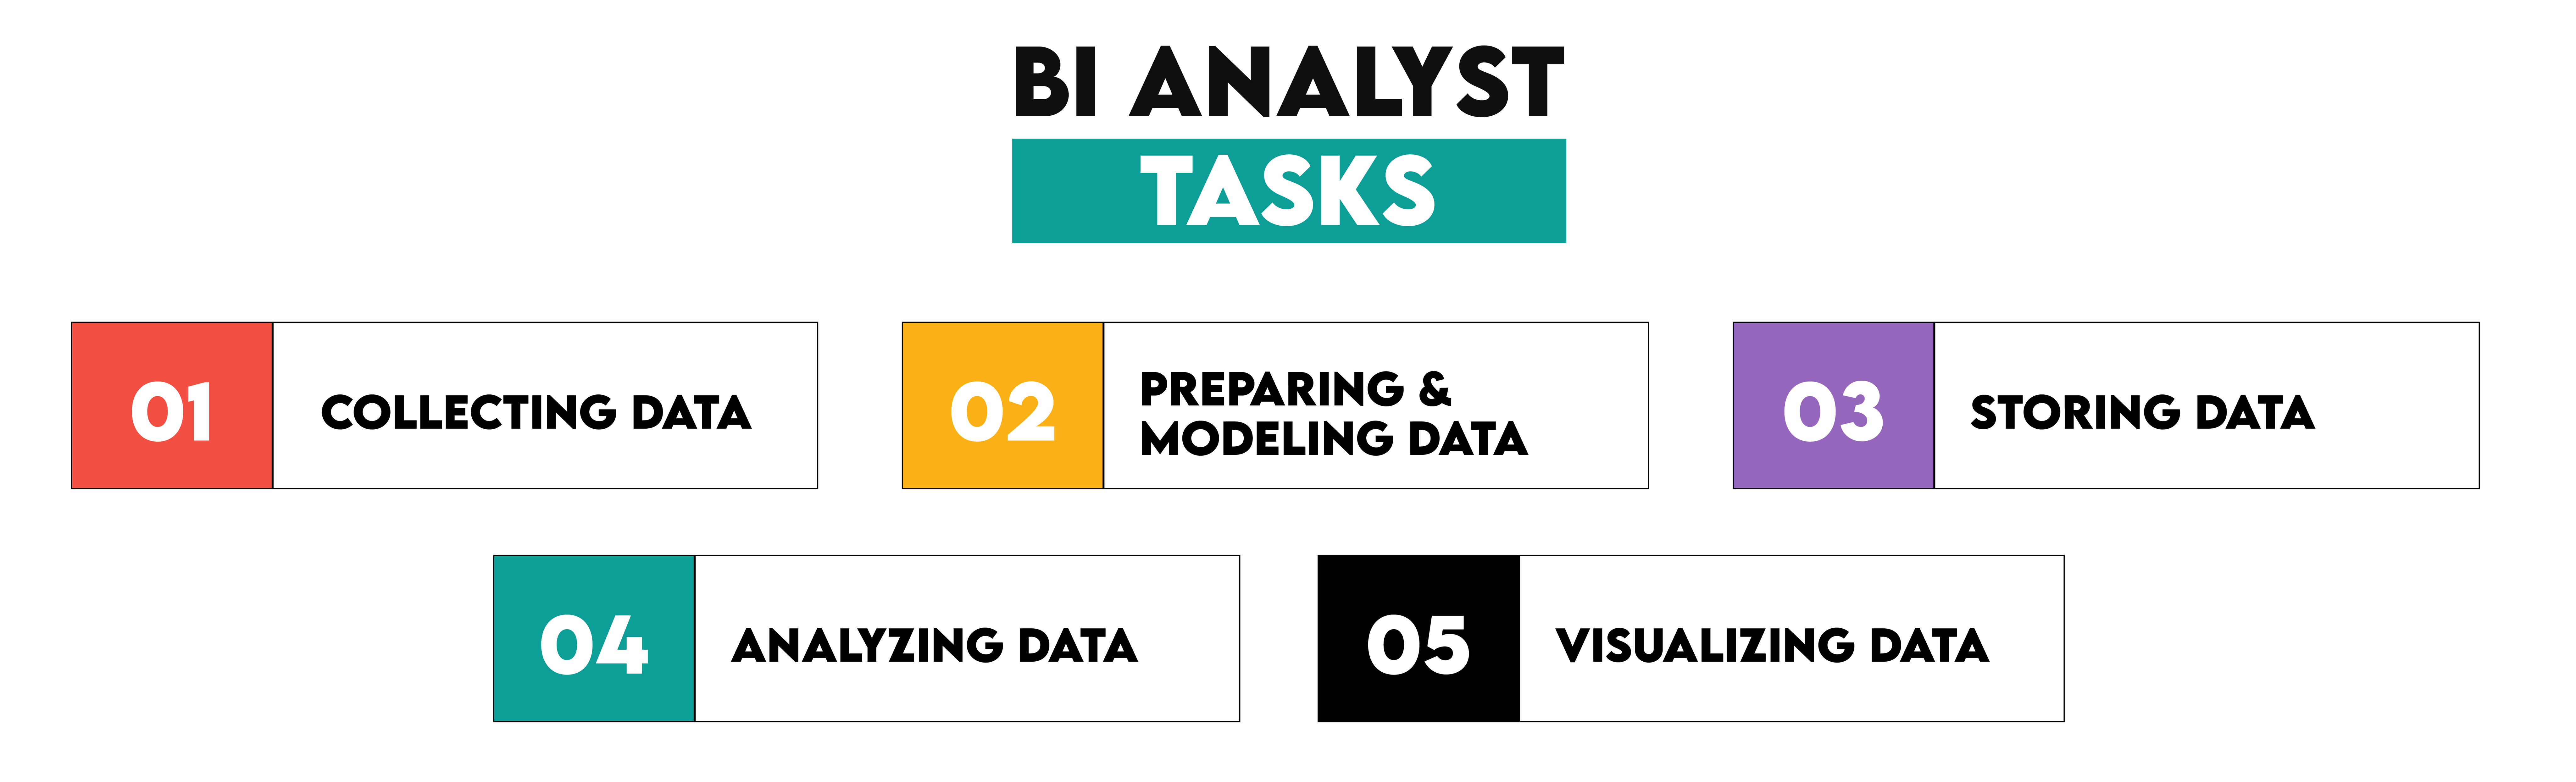 What Does a BI Analyst Do